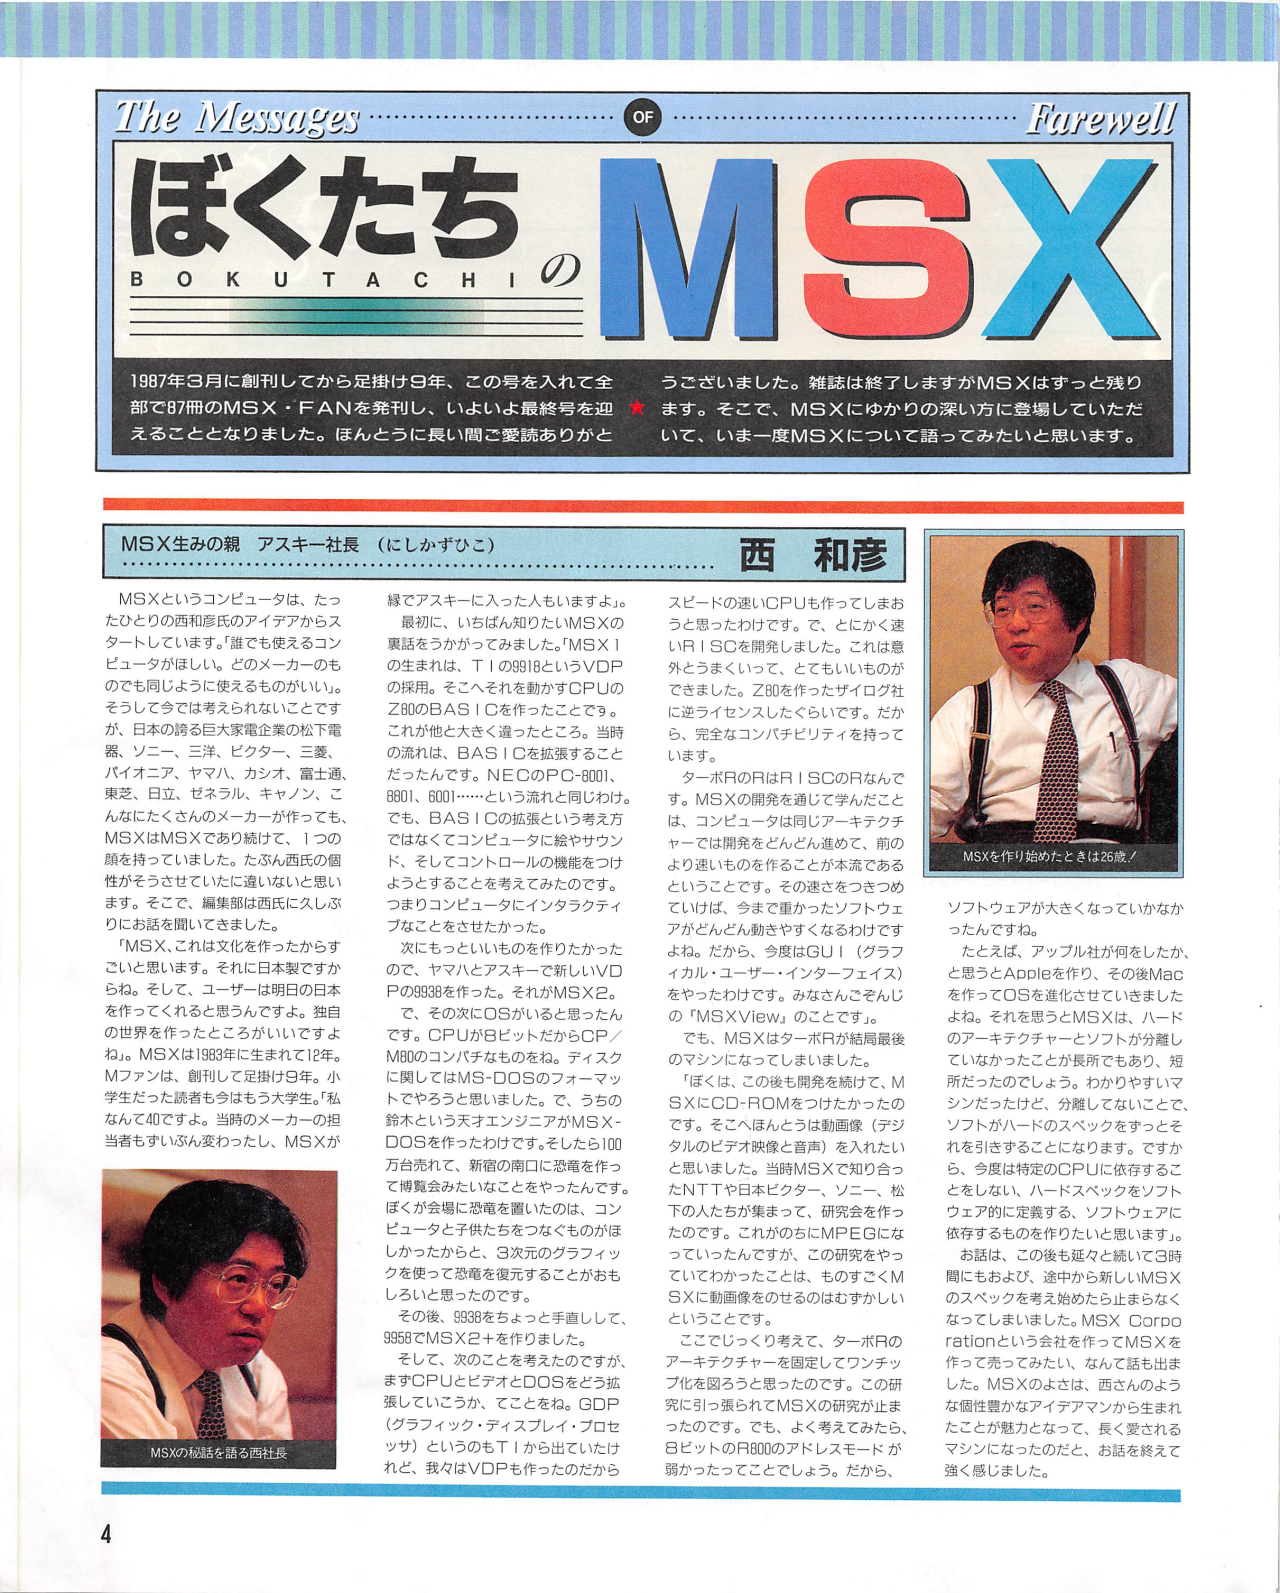 Farewell Messages to Our MSX